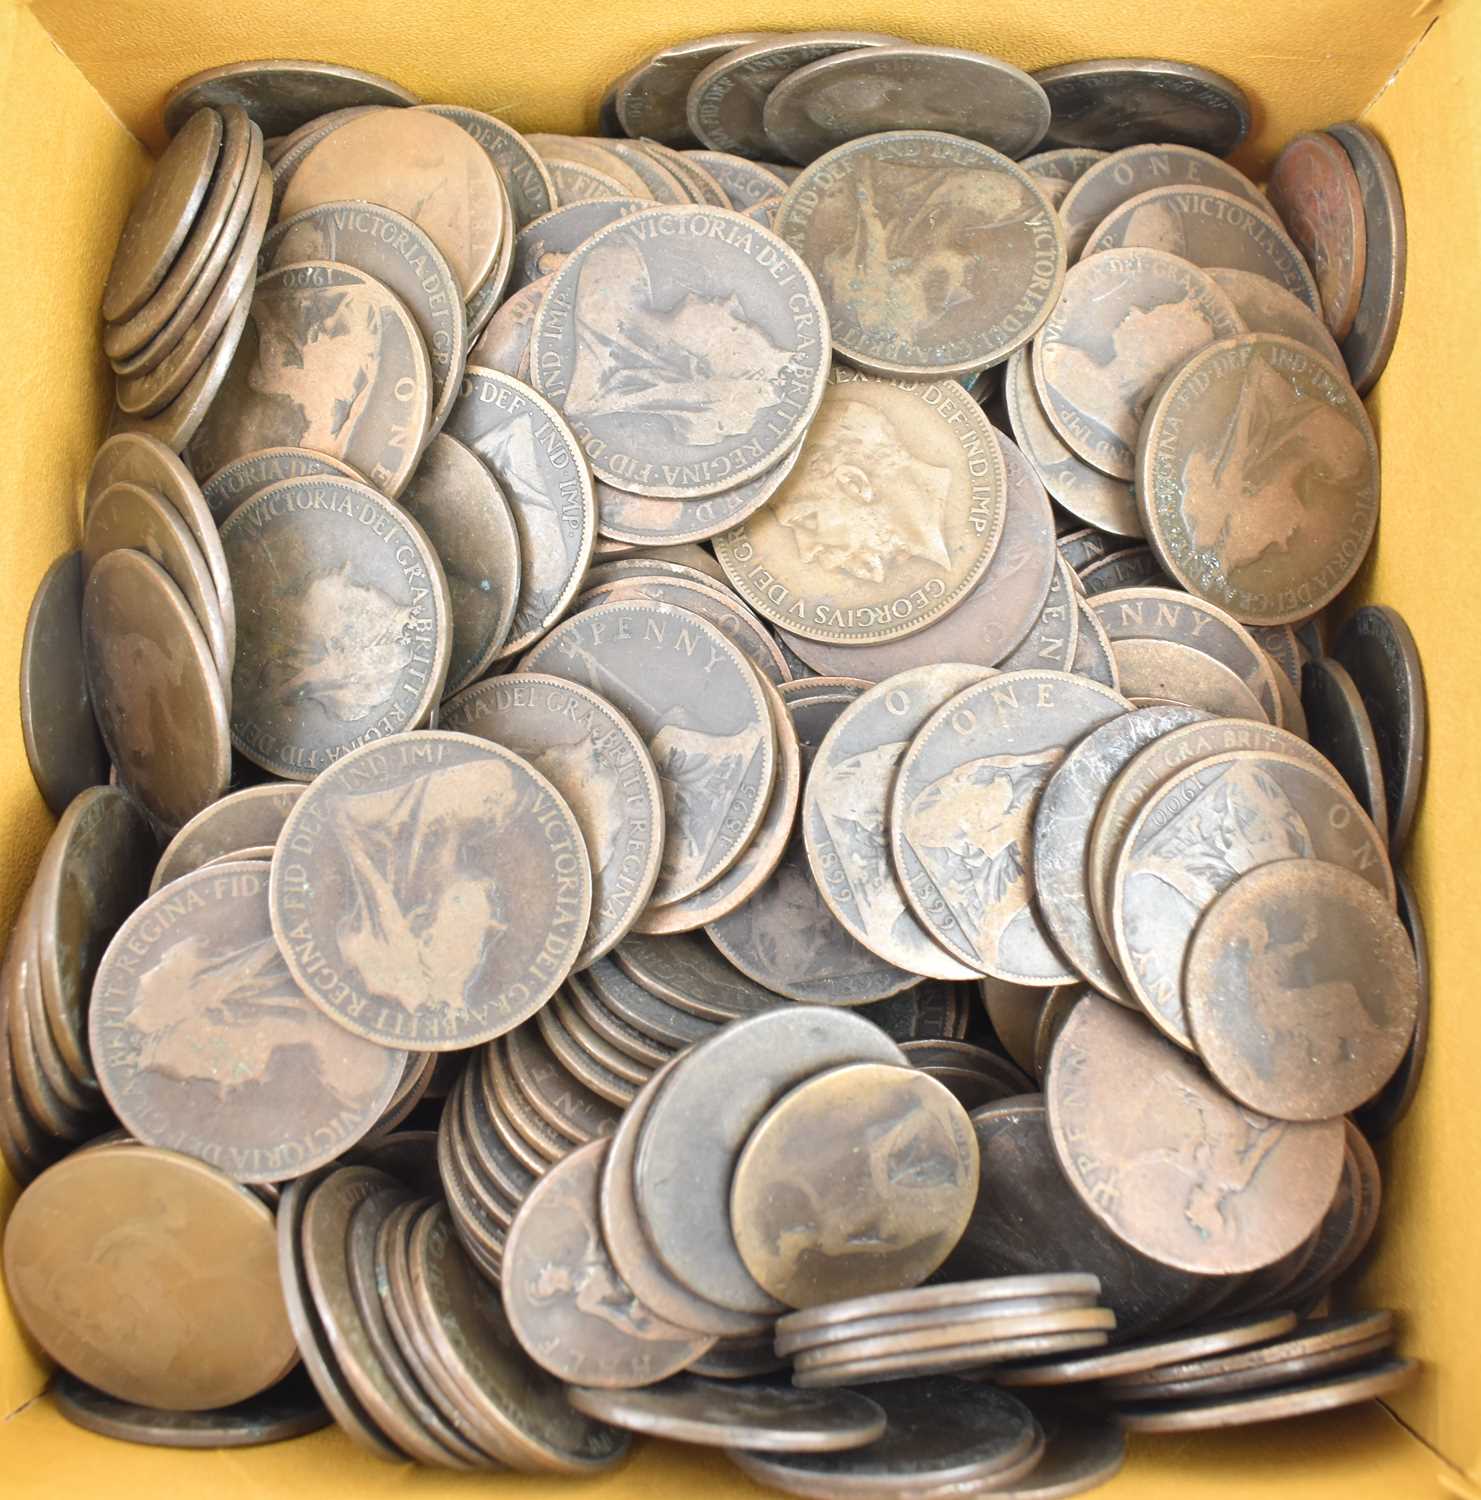 Approximately three hundred Victorian and earlier pennies, together with a small quantity of half